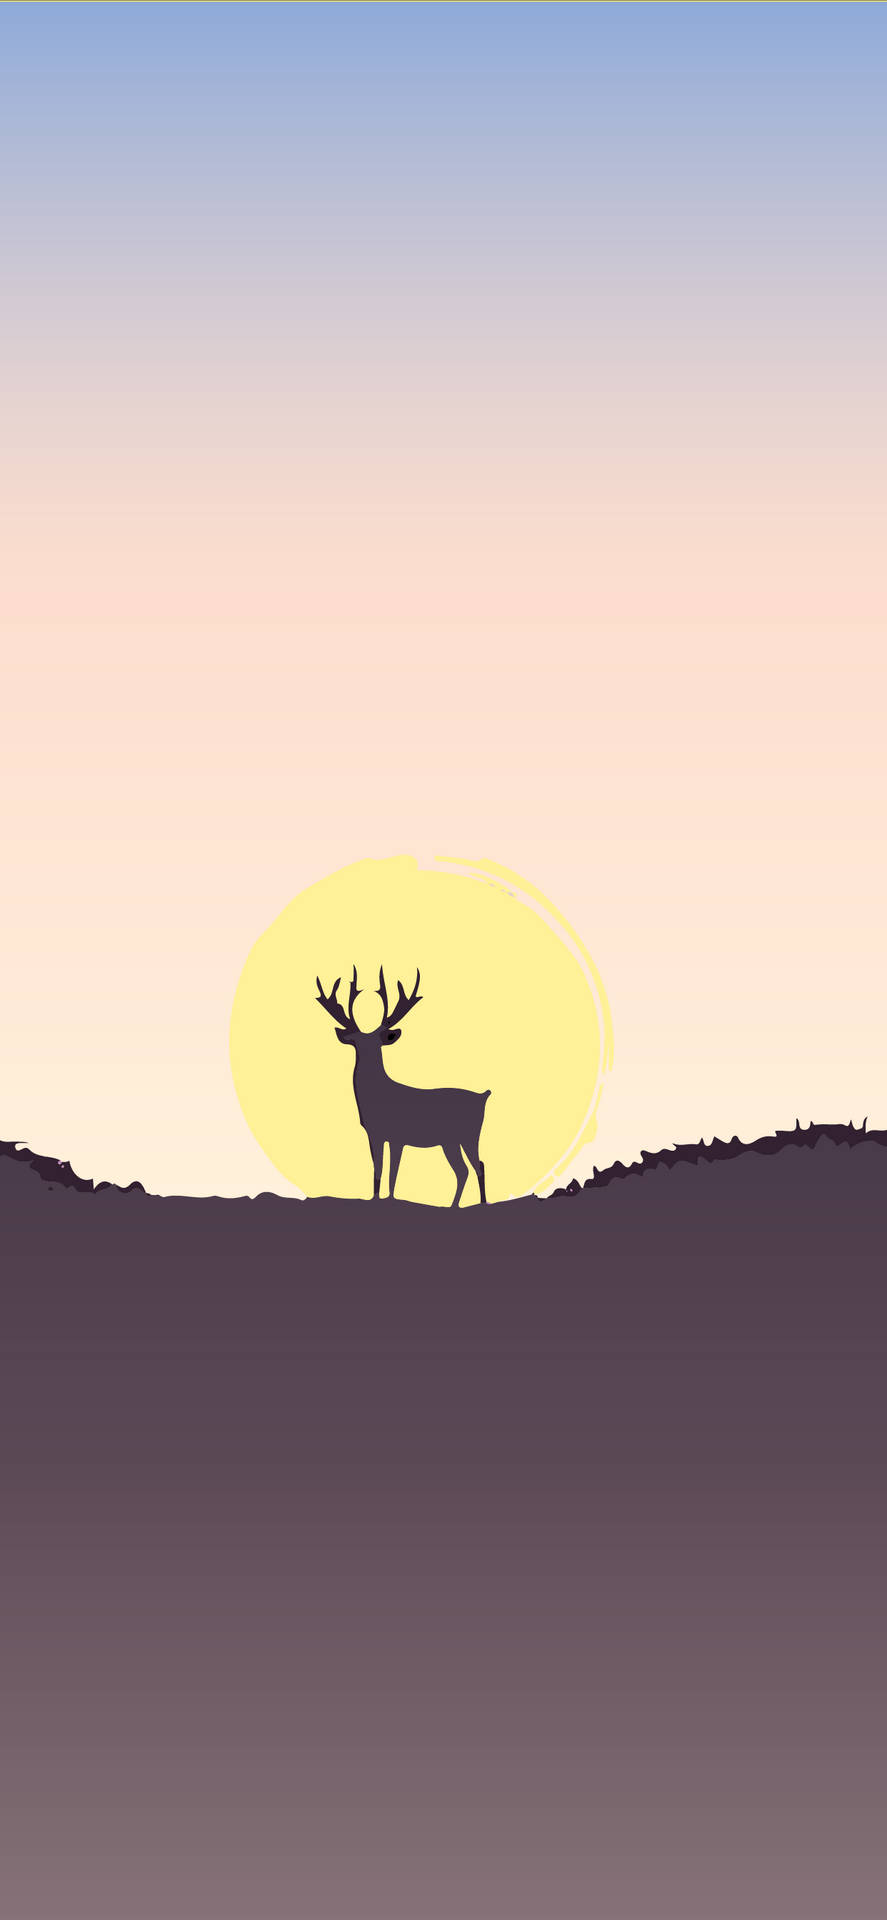 A Deer Silhouetted Against The Sunset Wallpaper